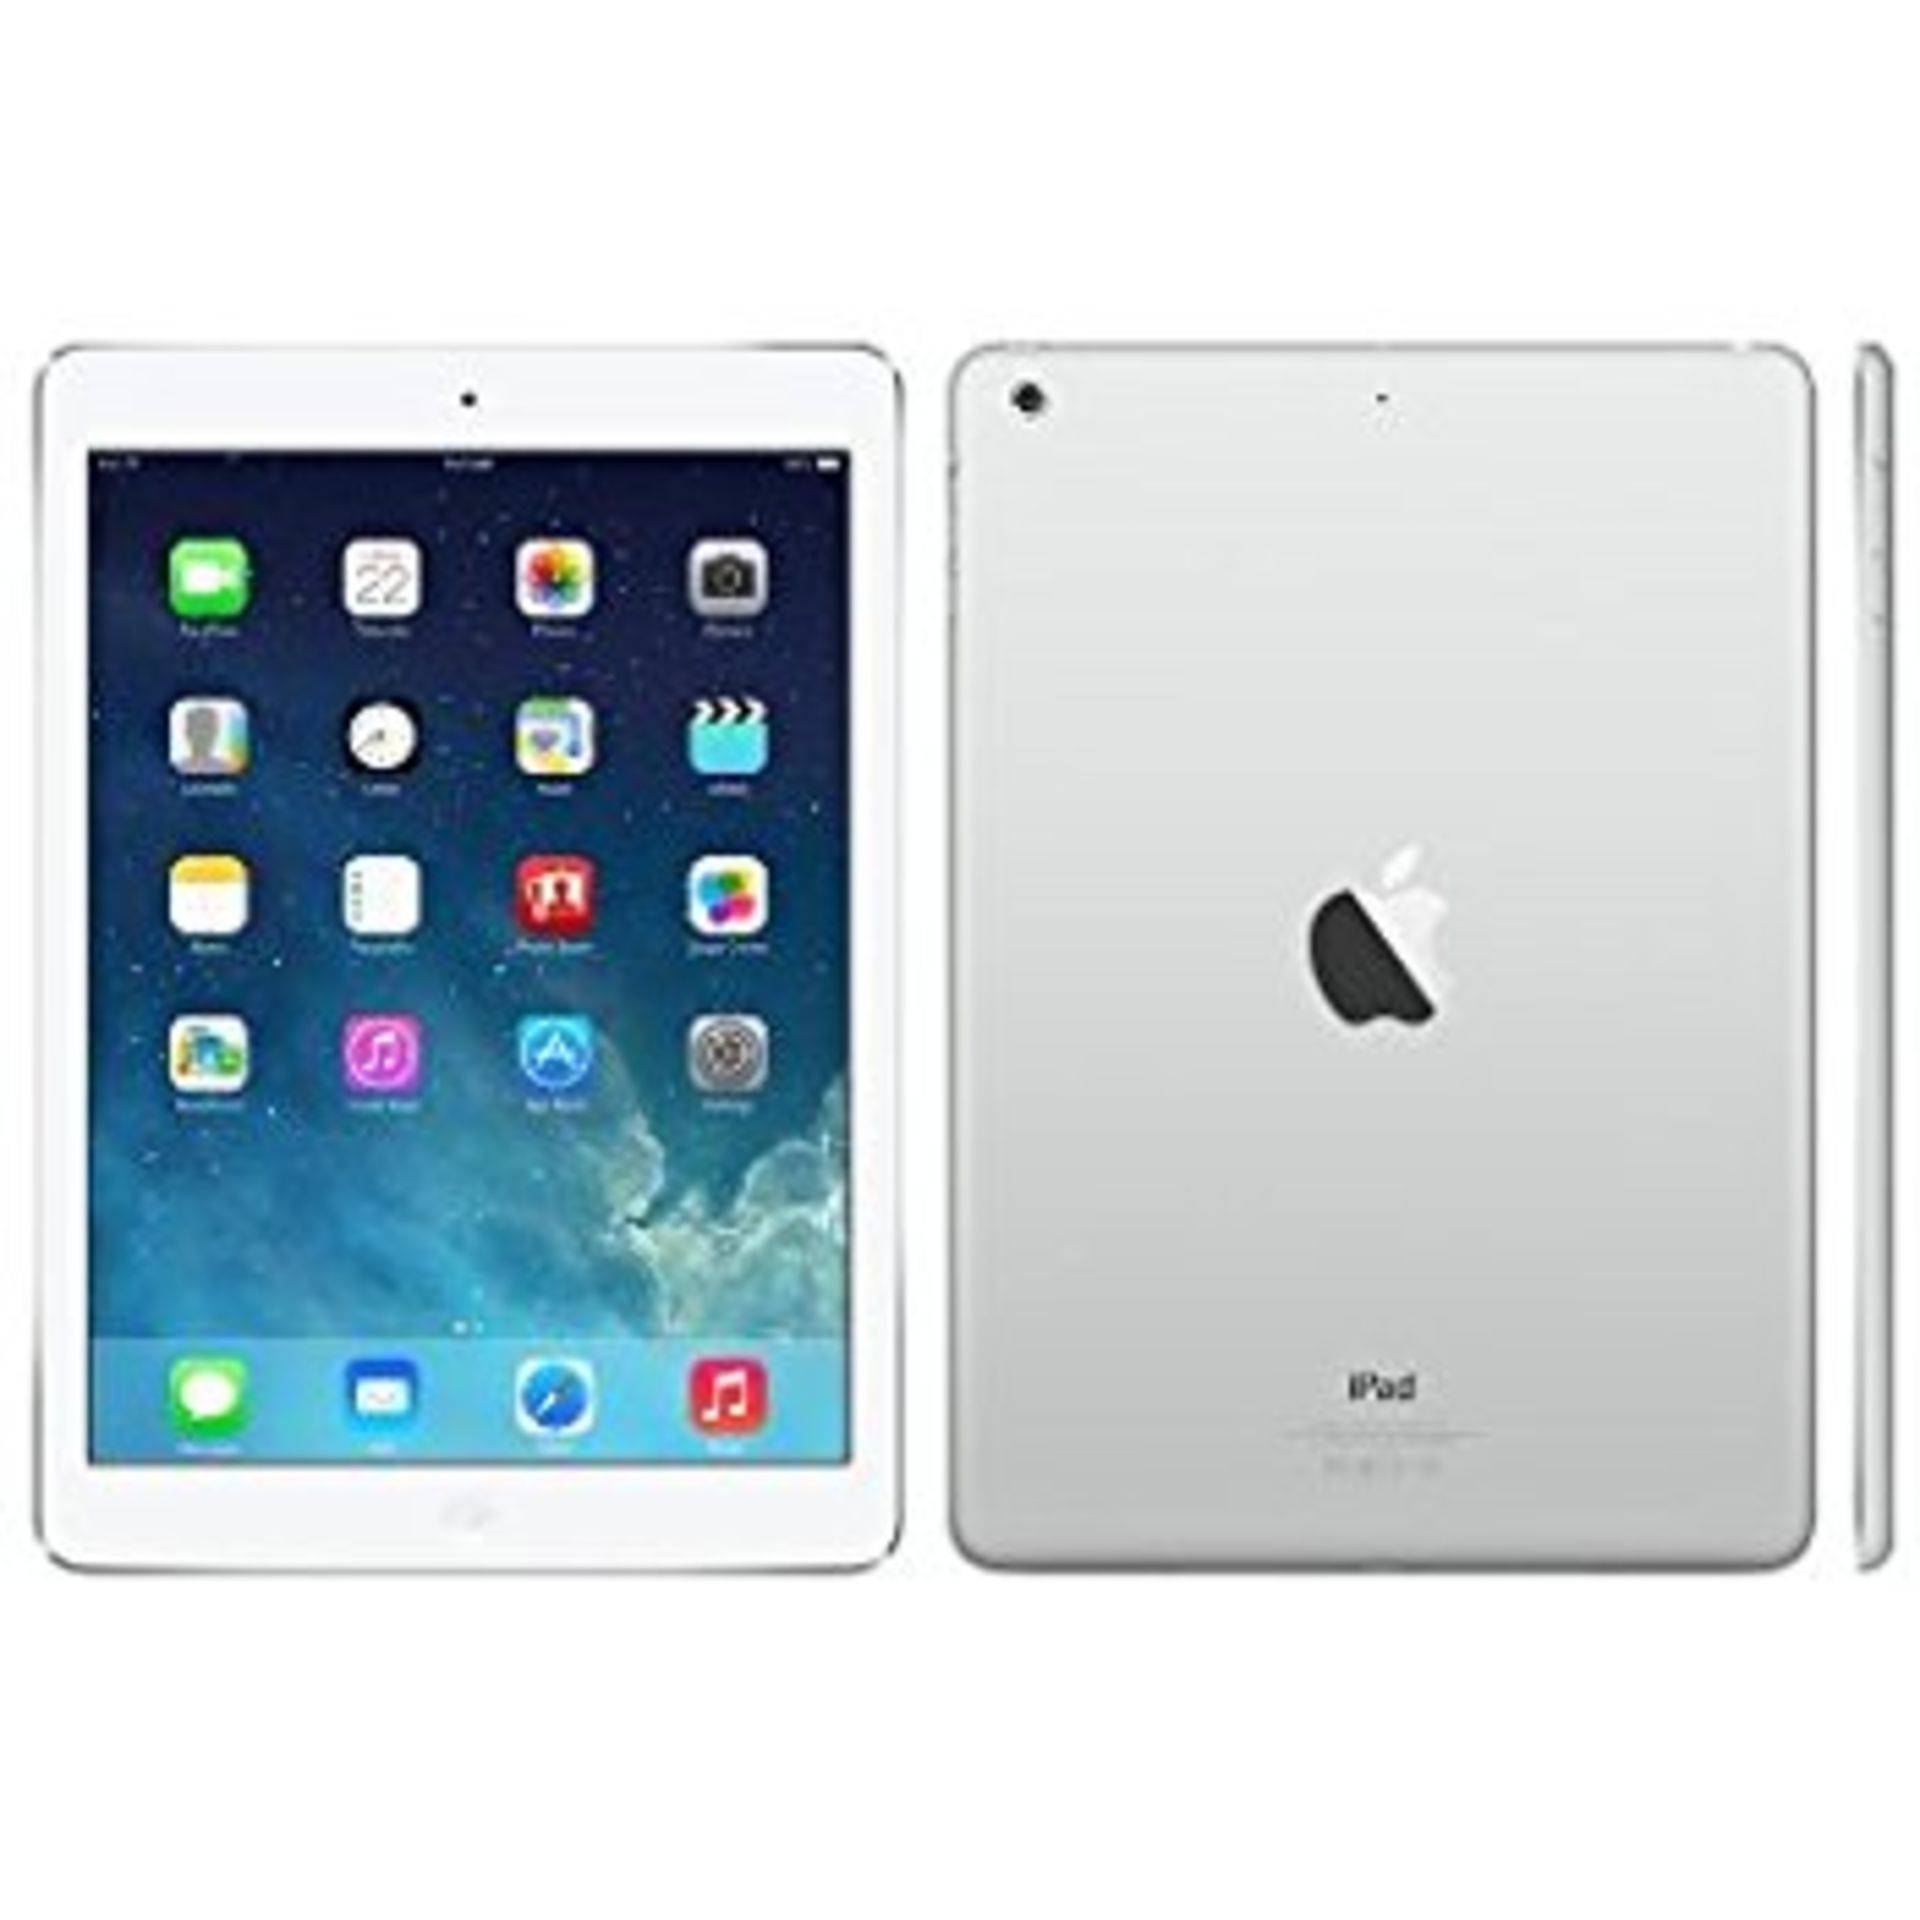 V Grade A/B Apple iPad Air 16GB Wi-Fi and Cellular 4G - Silver - Generic Box - Image 2 of 2